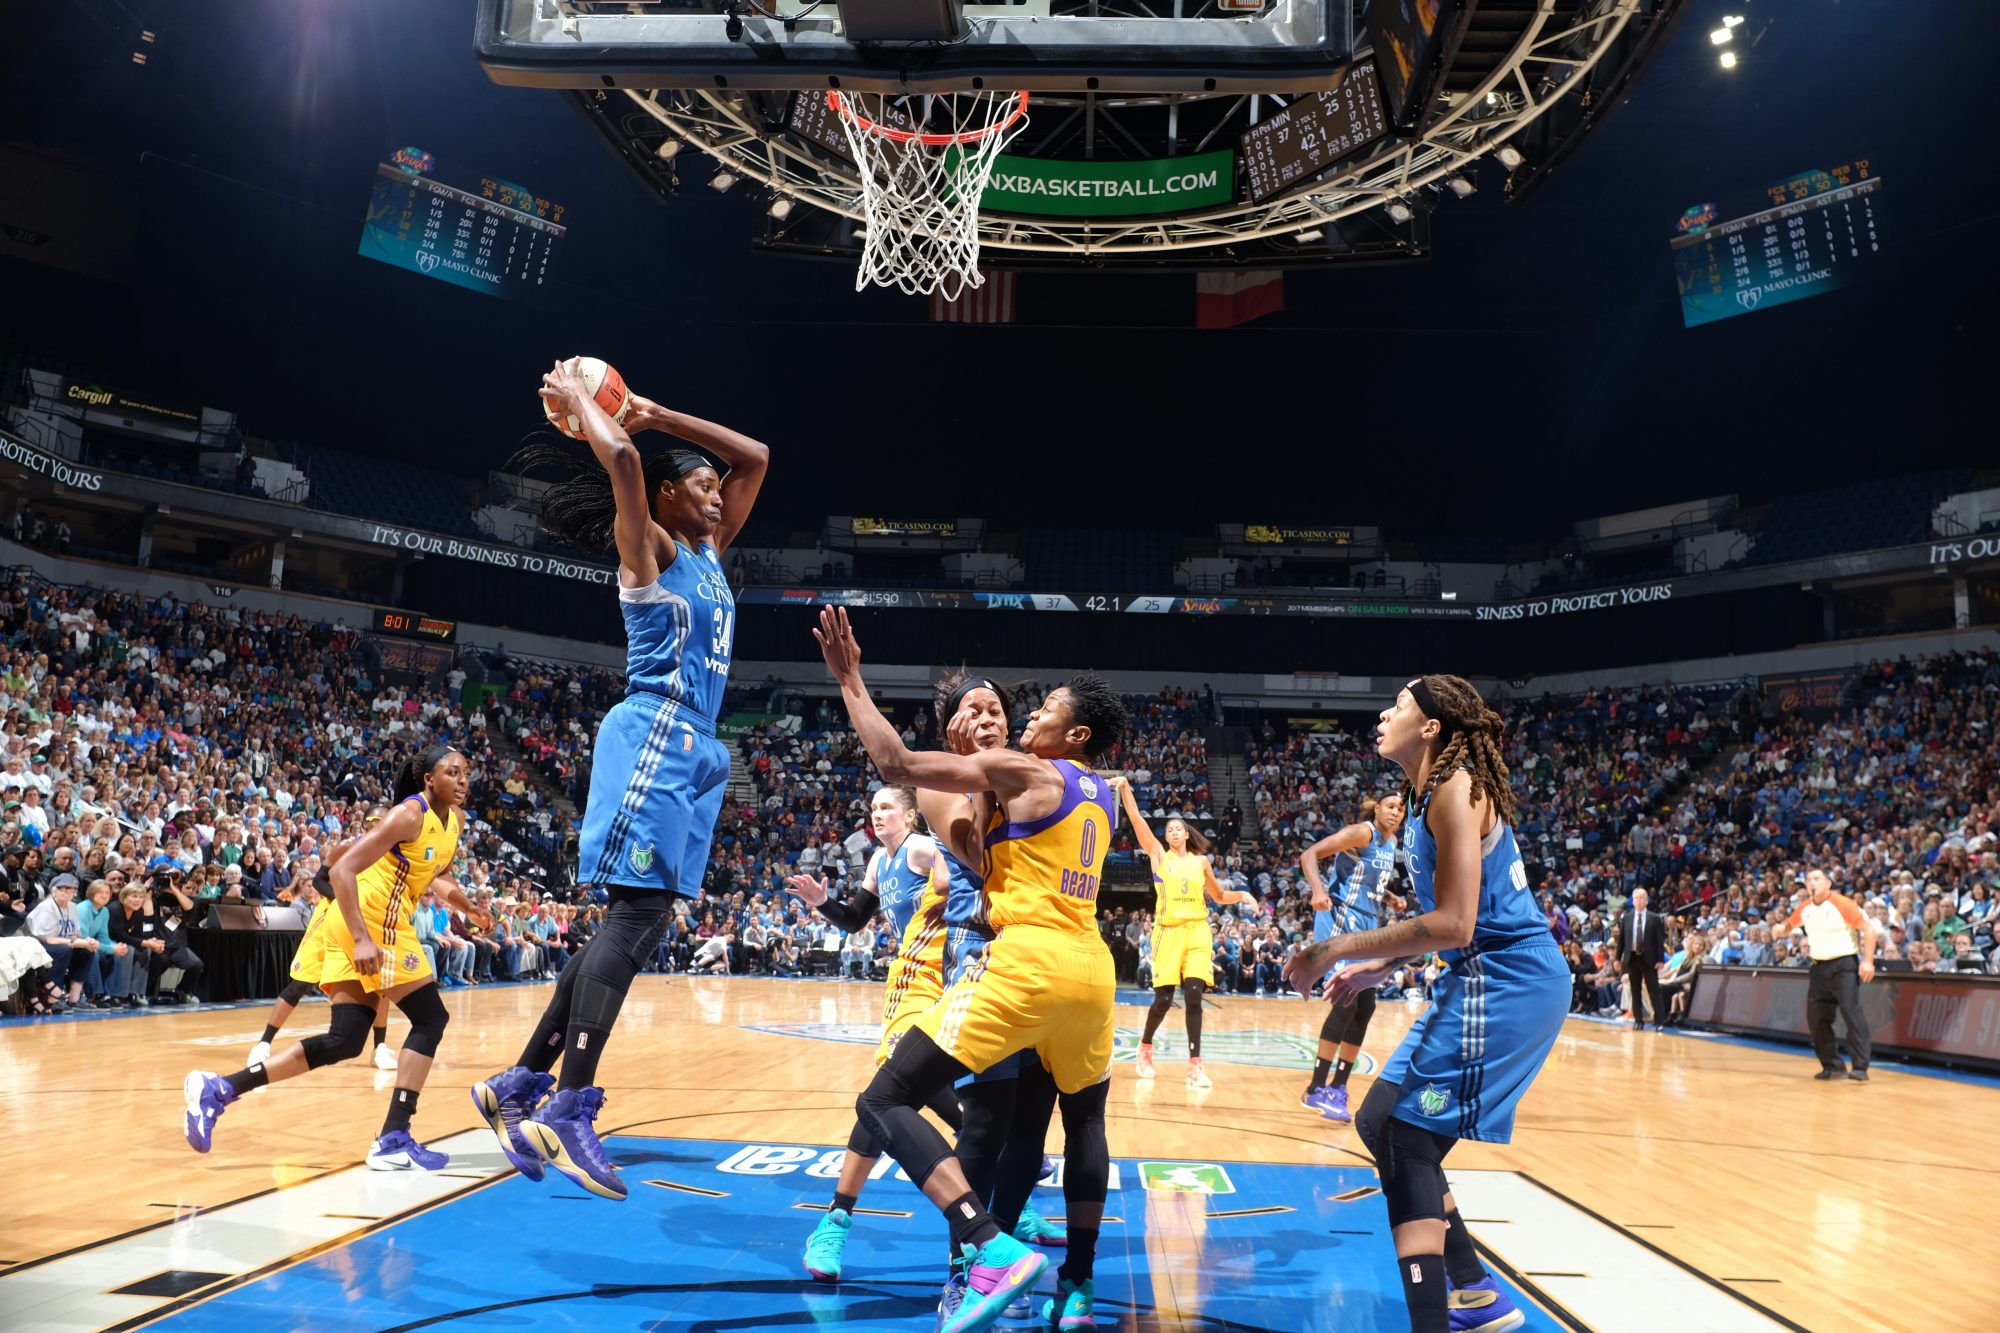 MINNEAPOLIS, MN - OCTOBER 11:  Sylvia Fowles #34 of the Minnesota Lynx grabs the rebound against the Los Angeles Sparks during Game Two of the 2016 WNBA Finals on October 11, 2016 at Target Center in Minneapolis, Minnesota. NOTE TO USER: User expressly acknowledges and agrees that, by downloading and or using this Photograph, user is consenting to the terms and conditions of the Getty Images License Agreement. Mandatory Copyright Notice: Copyright 2016 NBAE (Photo by David Sherman/NBAE via Getty Images)